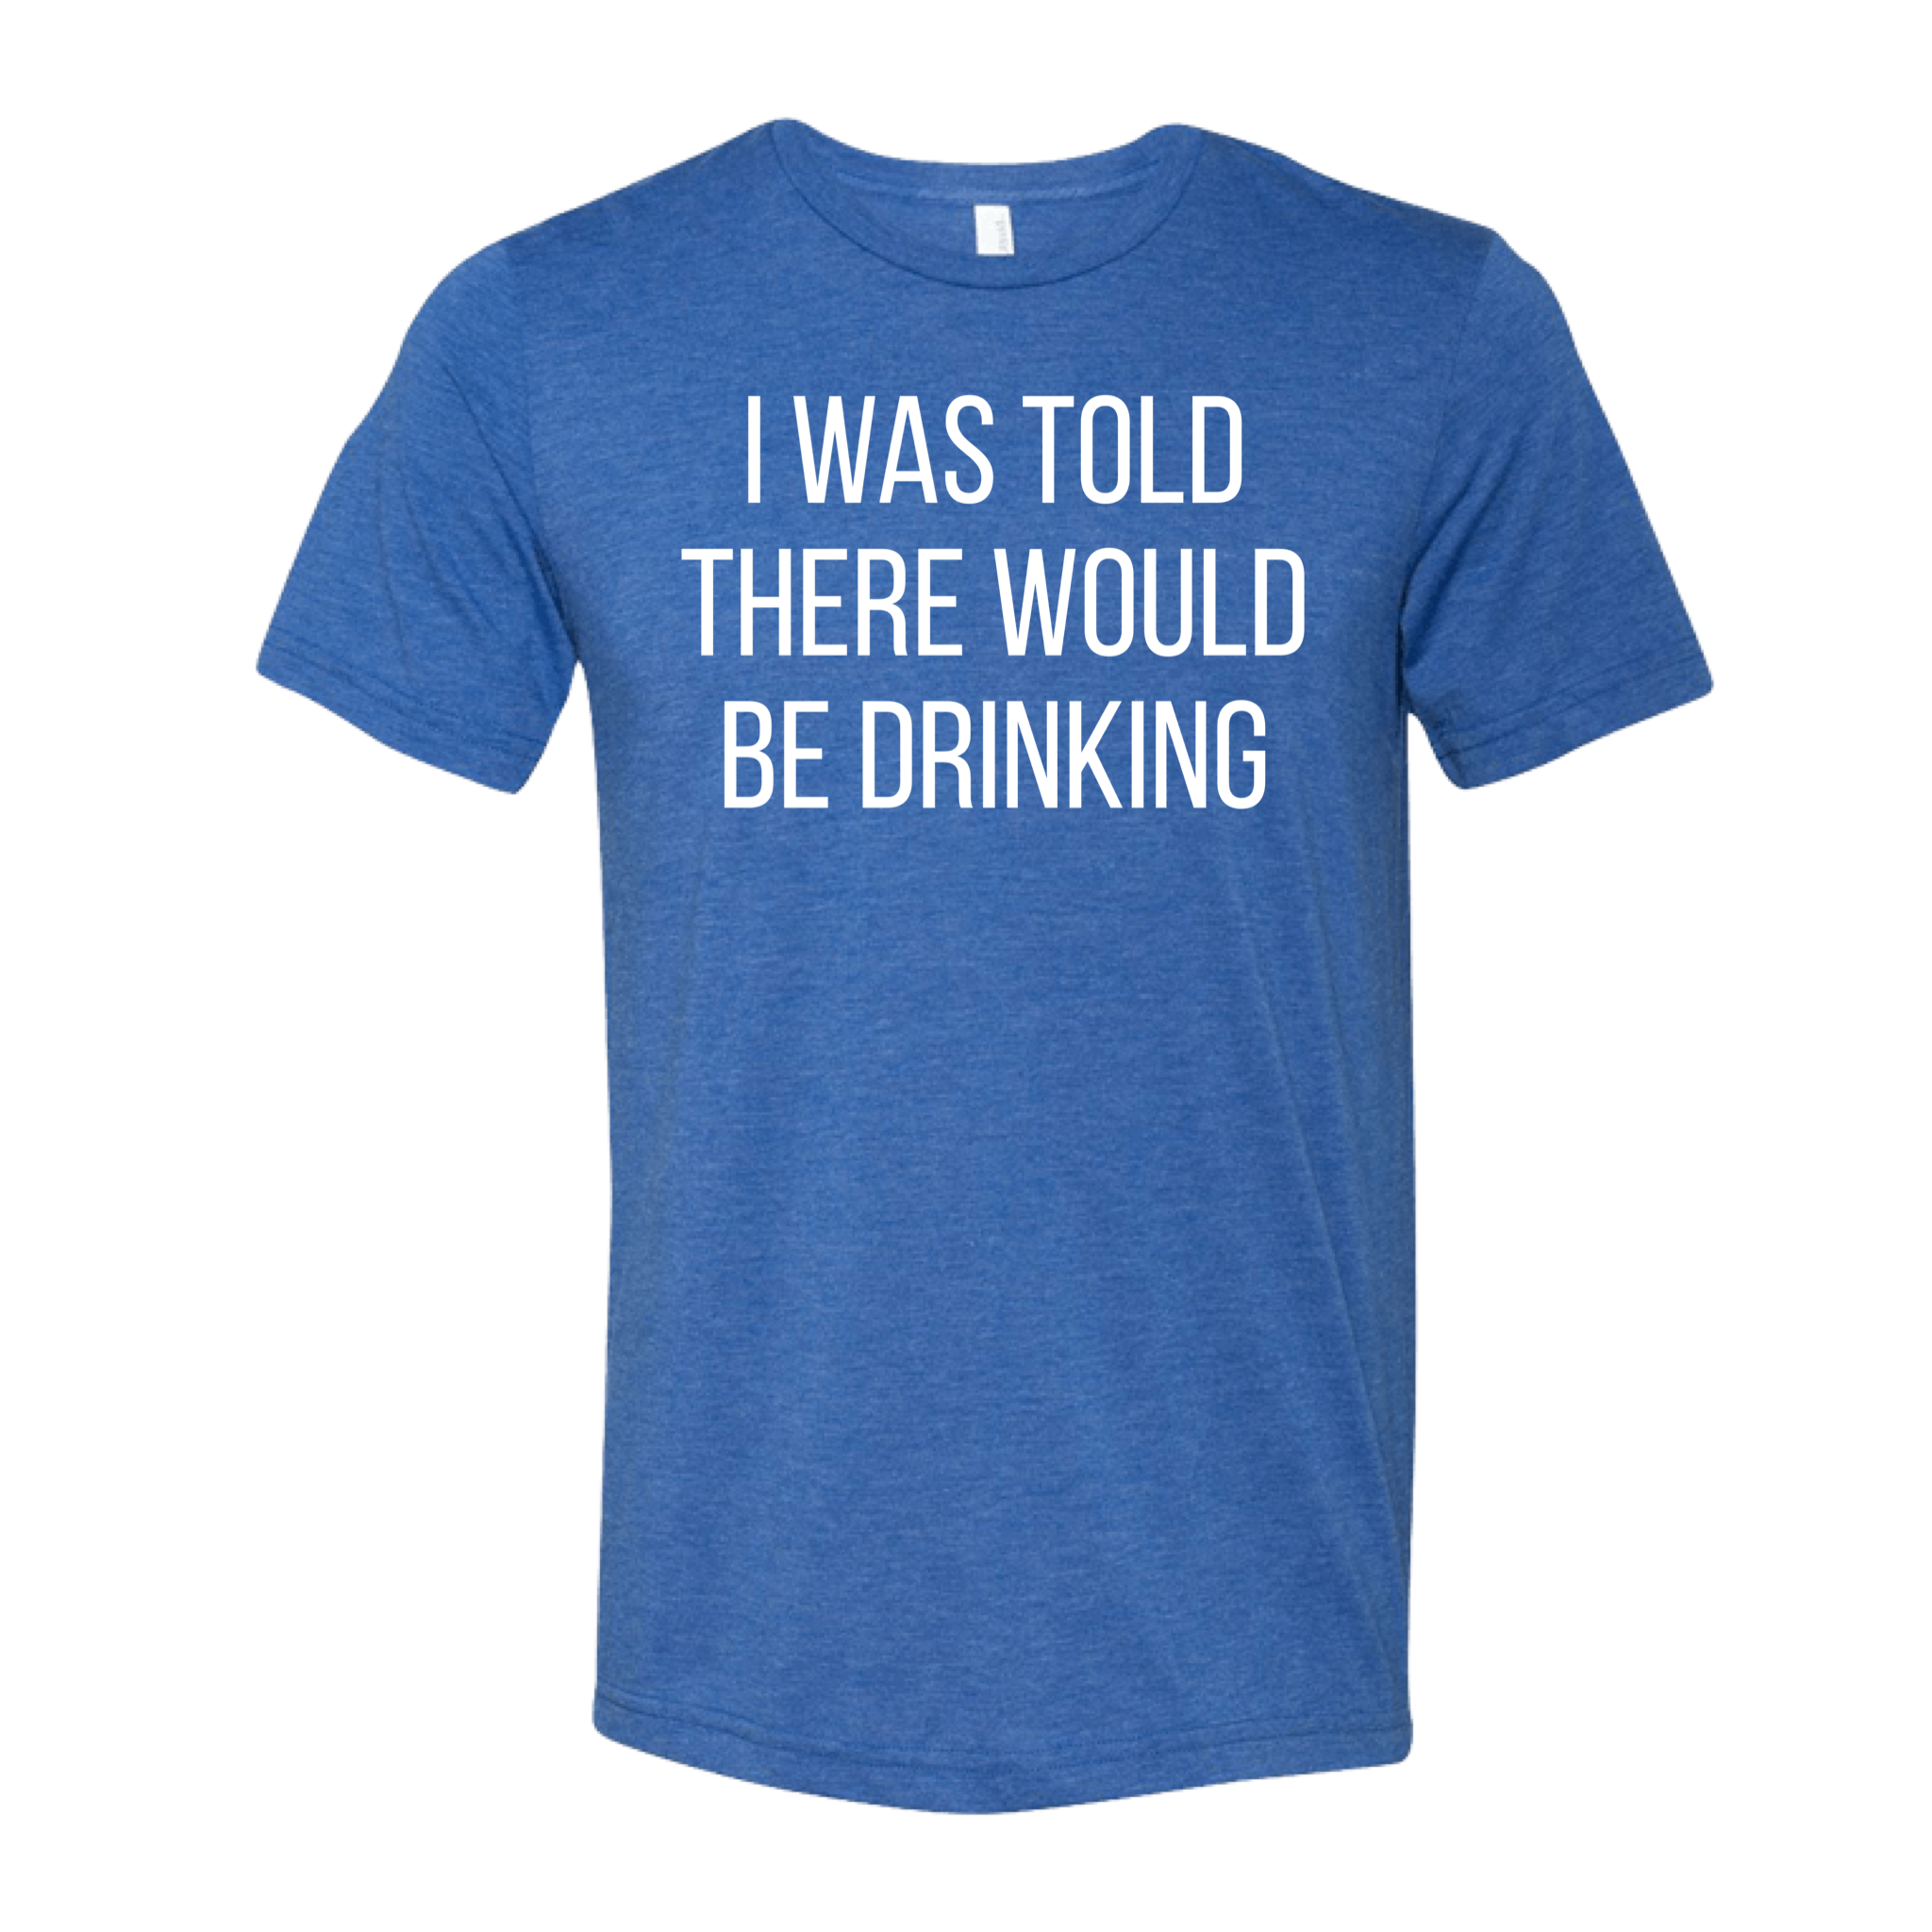 I WAS TOLD THERE WOULD BE DRINKING T-SHIRT